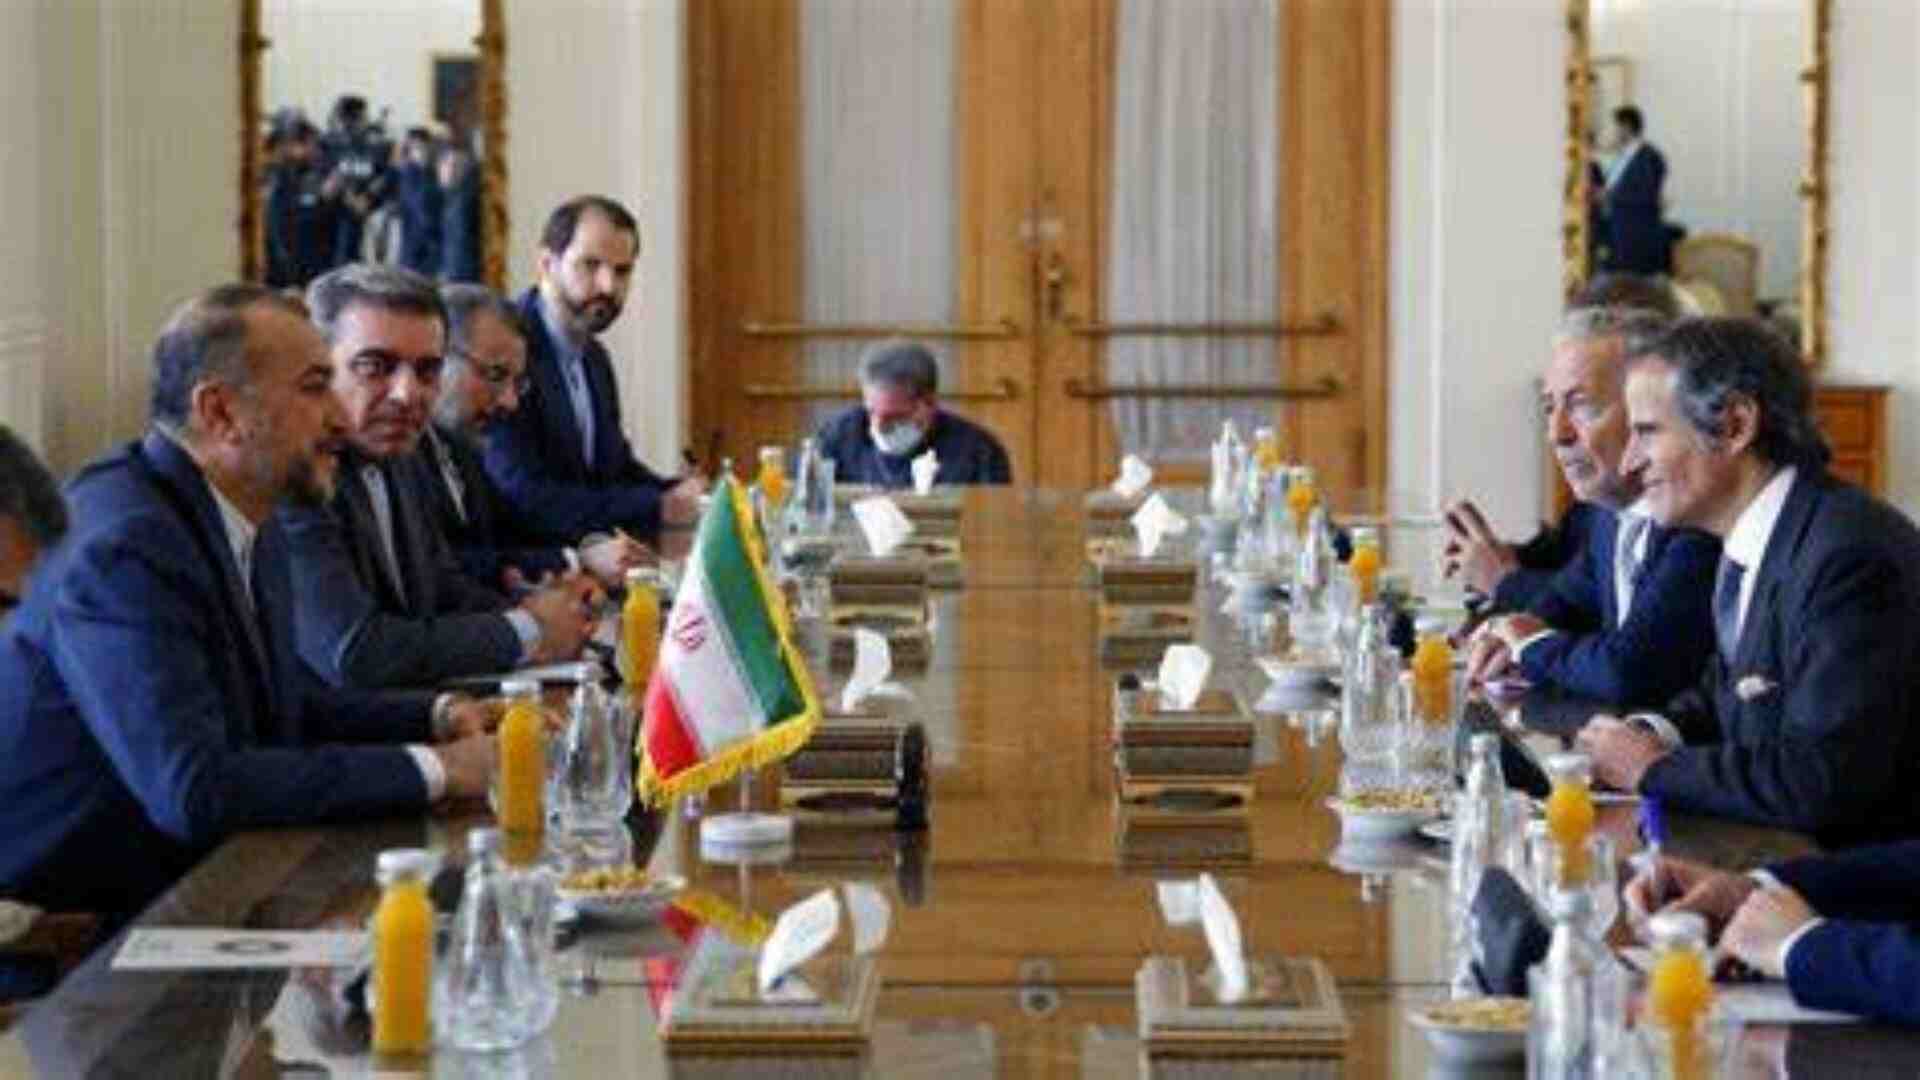 European Nations Britain, Germany Seeks Iran’s Condemnation At UN Nuclear Meeting